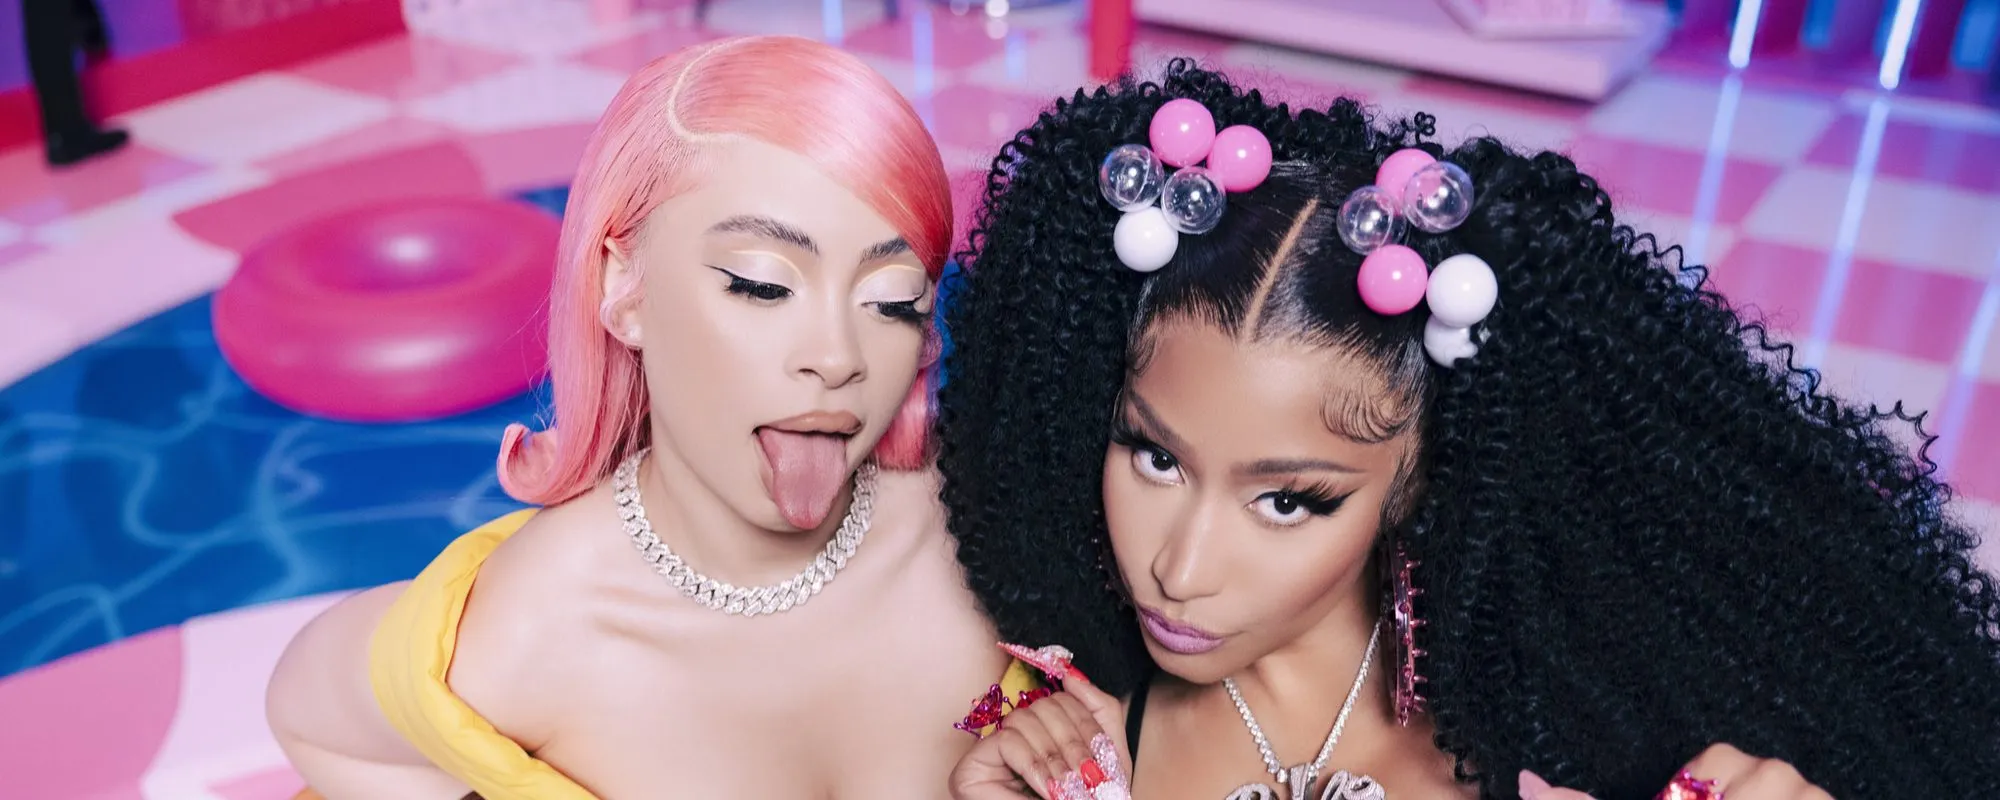 Nicki Minaj and Ice Spice Connect for the Second Time on “Barbie World”